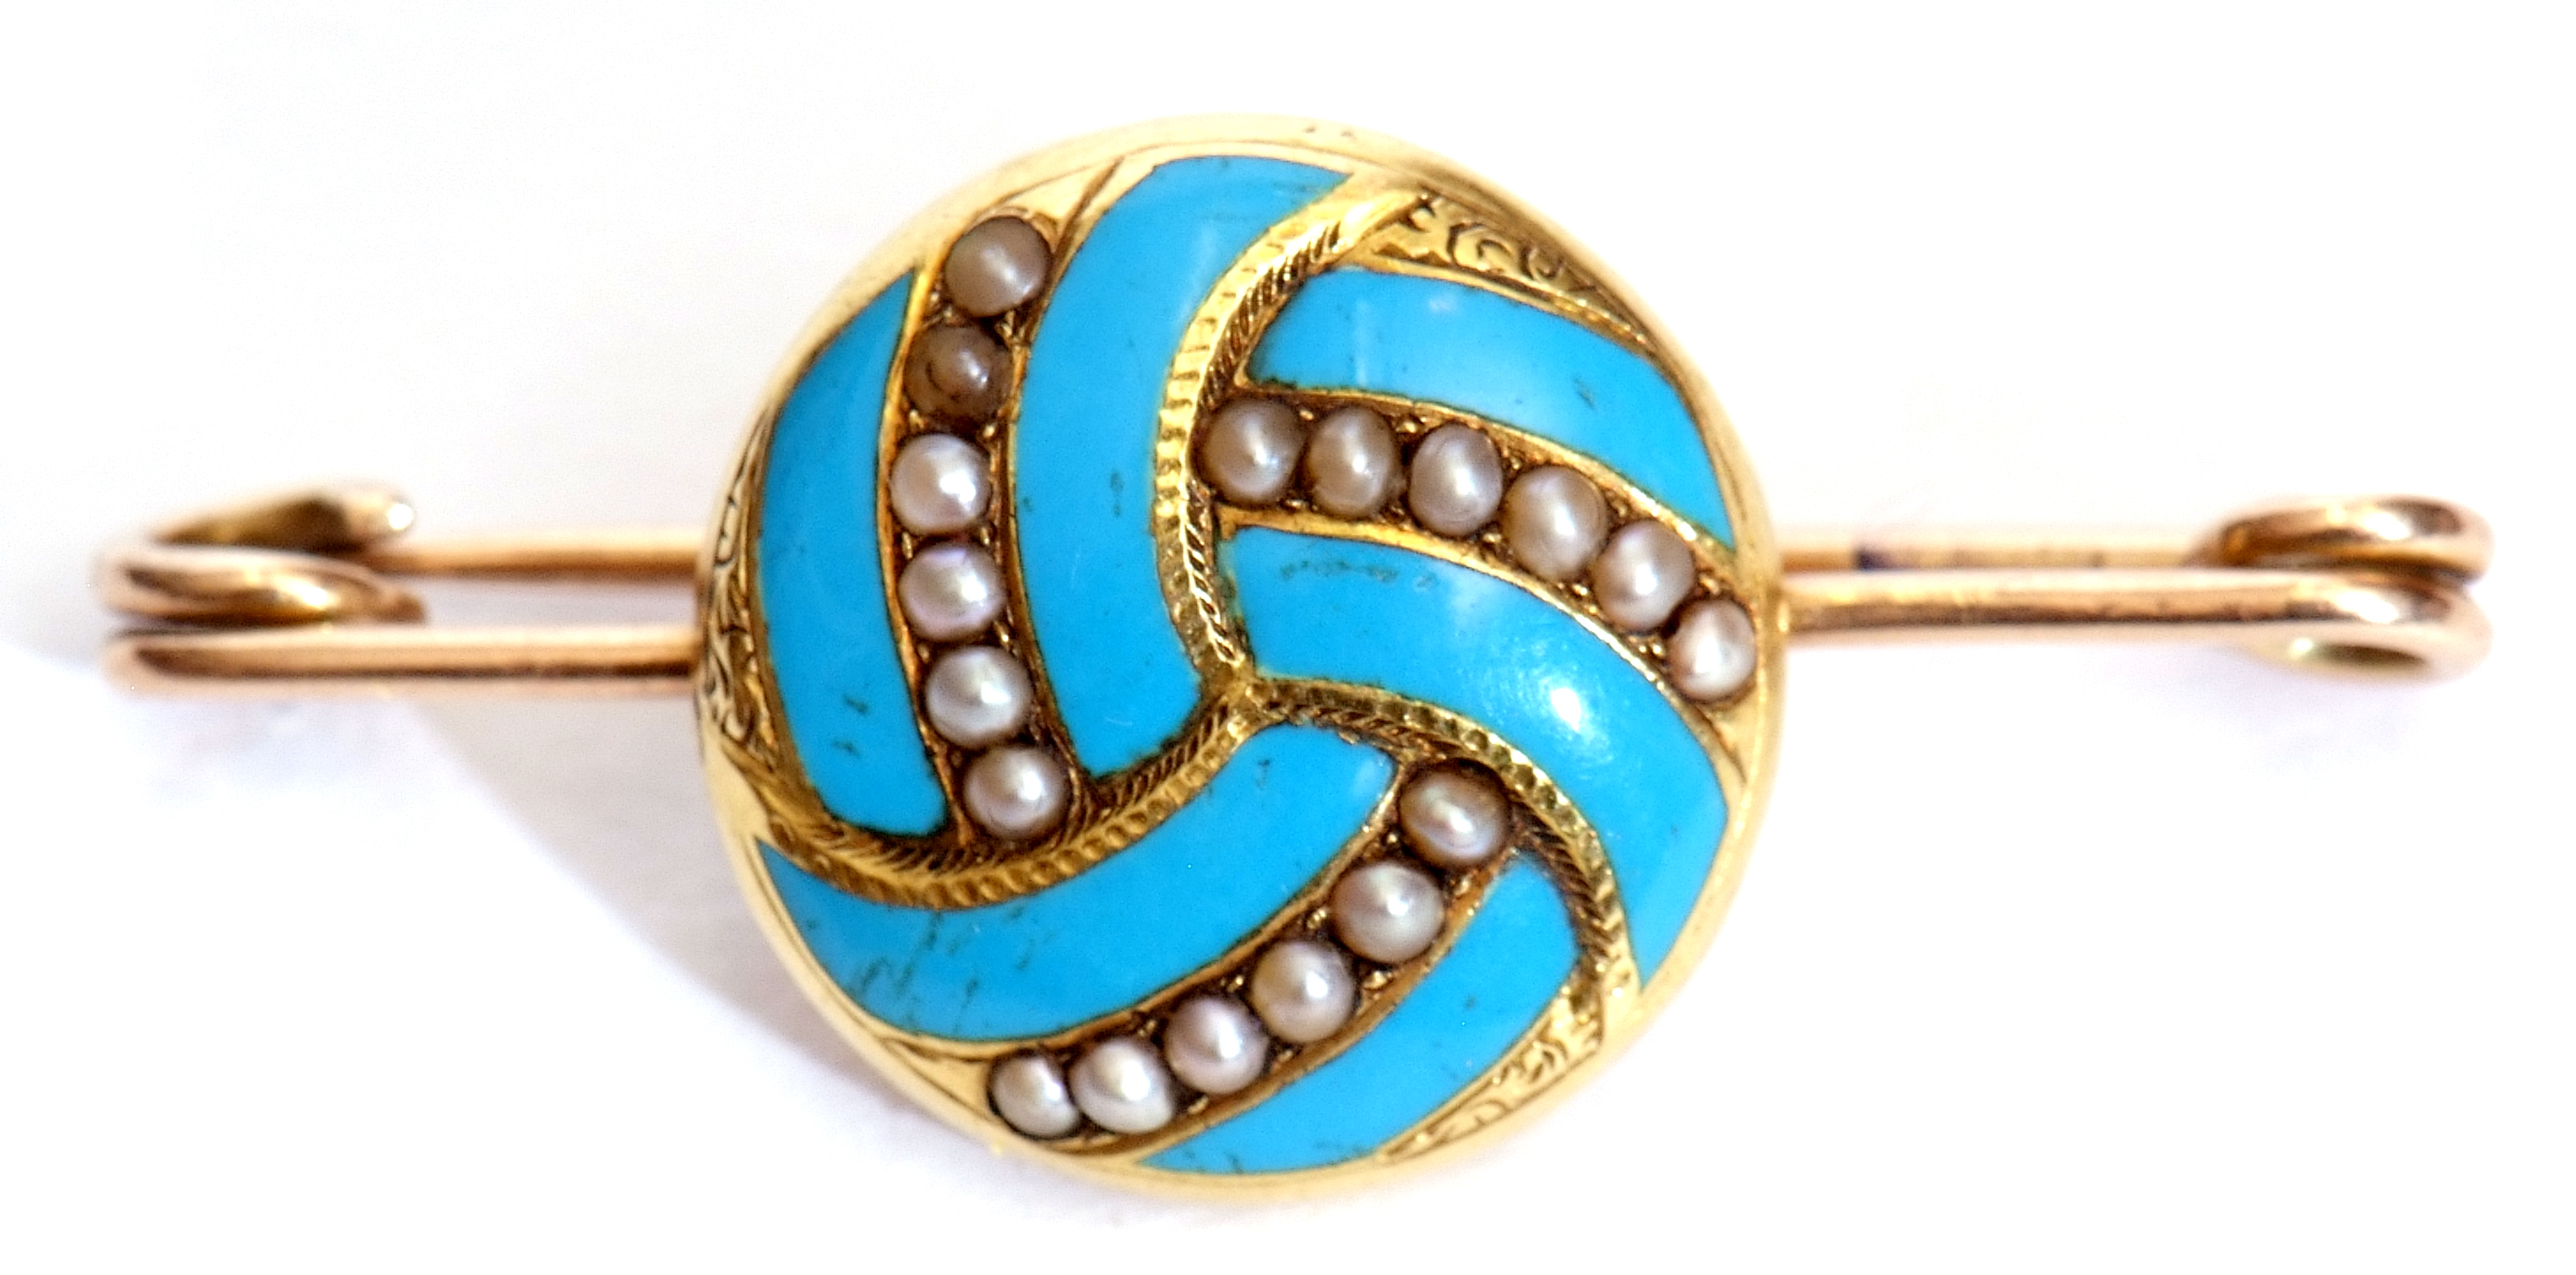 Antique turquoise enamel and seed pearl pin brooch, the circular panel with sections of turquoise